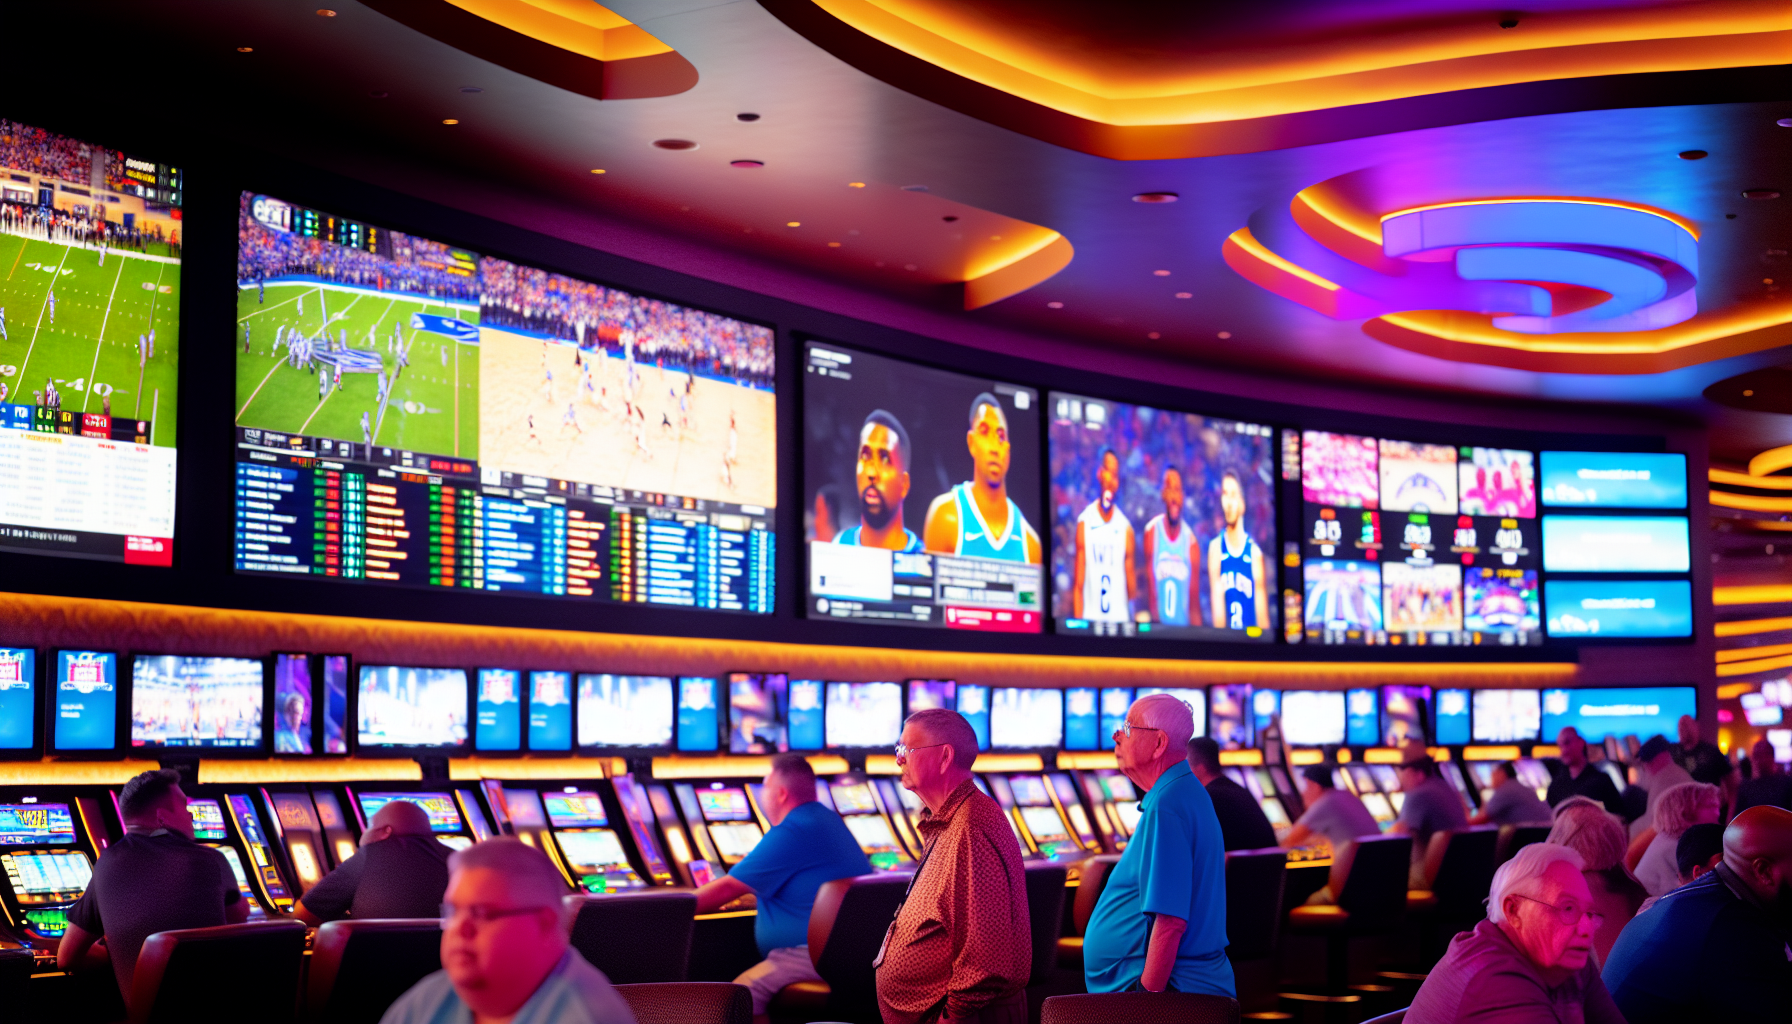 Photo of a sportsbook area with multiple screens displaying sports events and odds